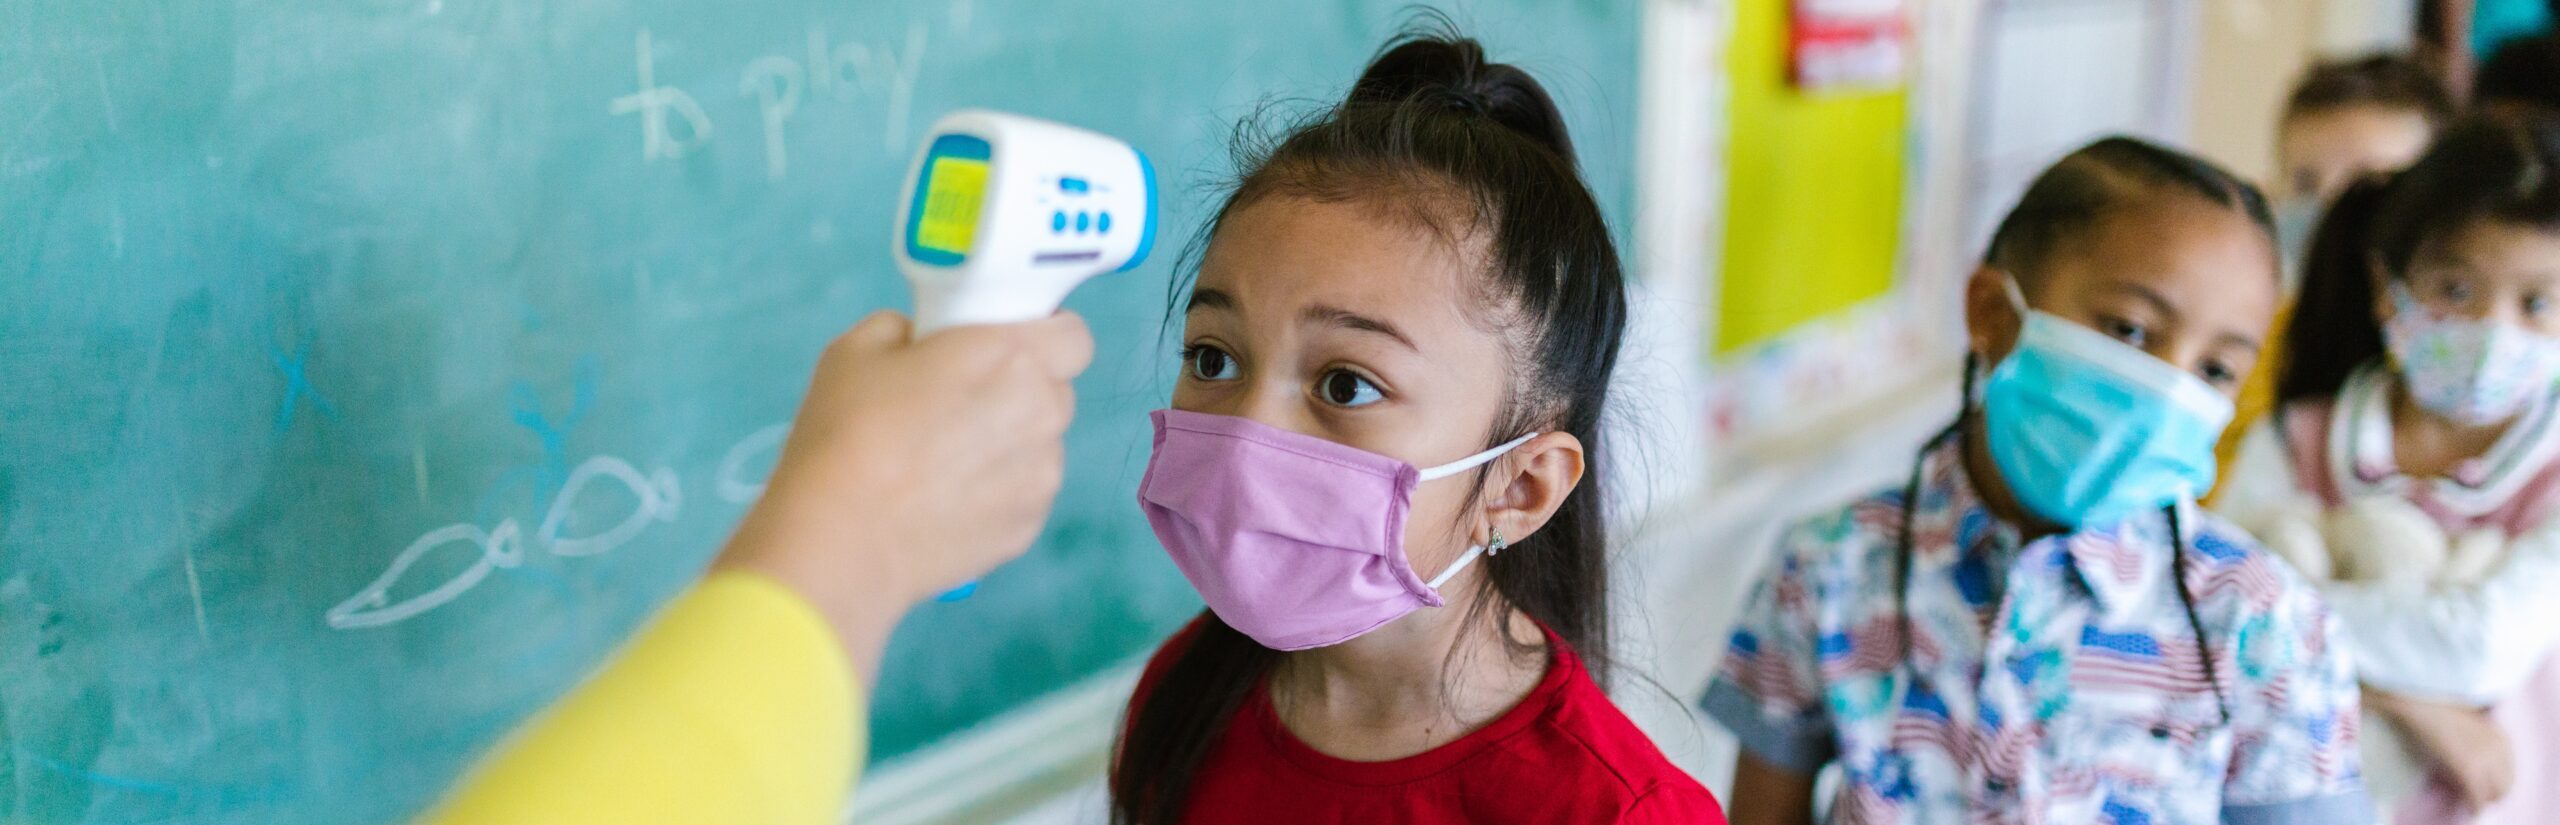 Image of girl getting her temperature taken